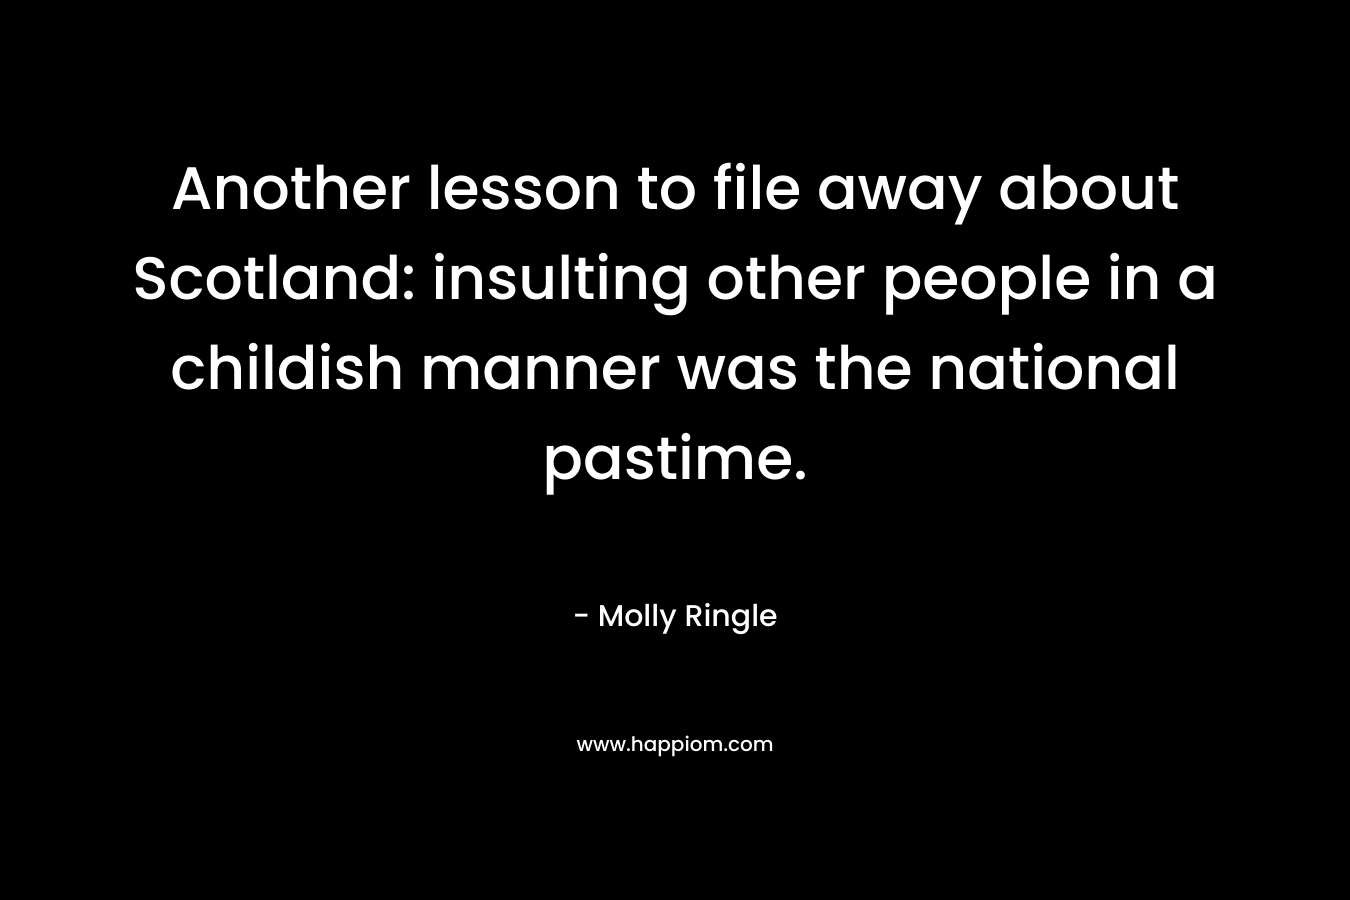 Another lesson to file away about Scotland: insulting other people in a childish manner was the national pastime. – Molly Ringle